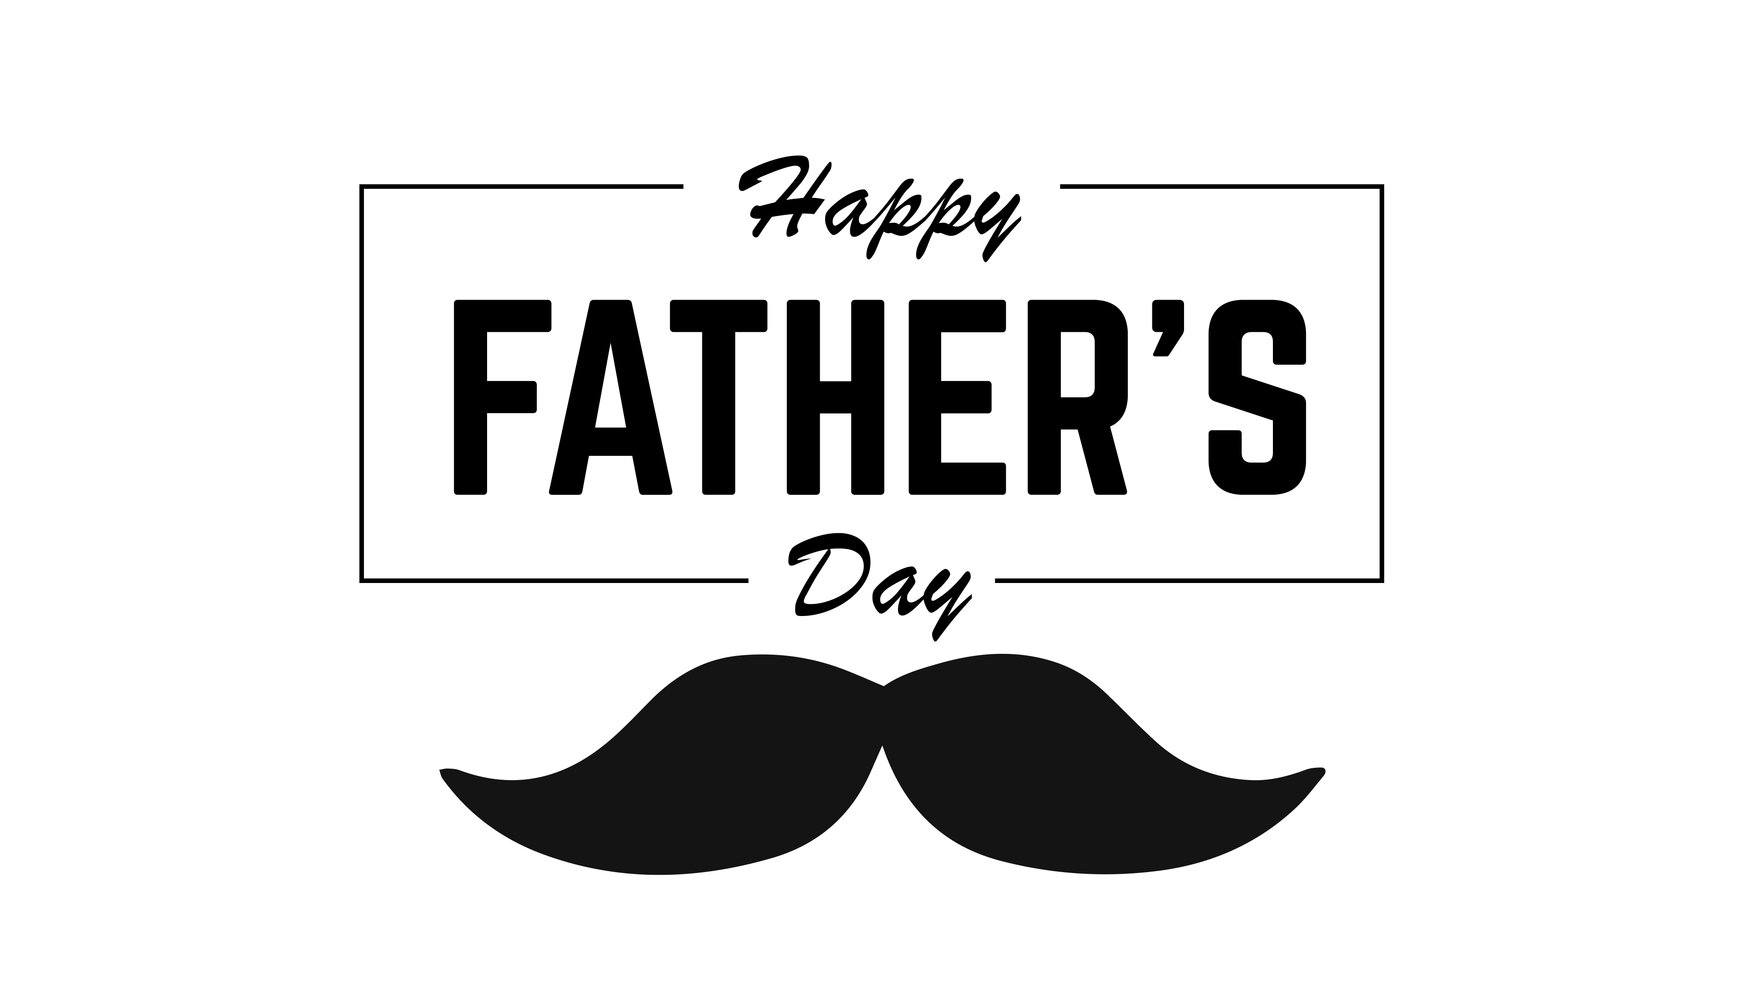 Free White Father's Day Background in Illustrator, EPS, SVG, JPG, PNG